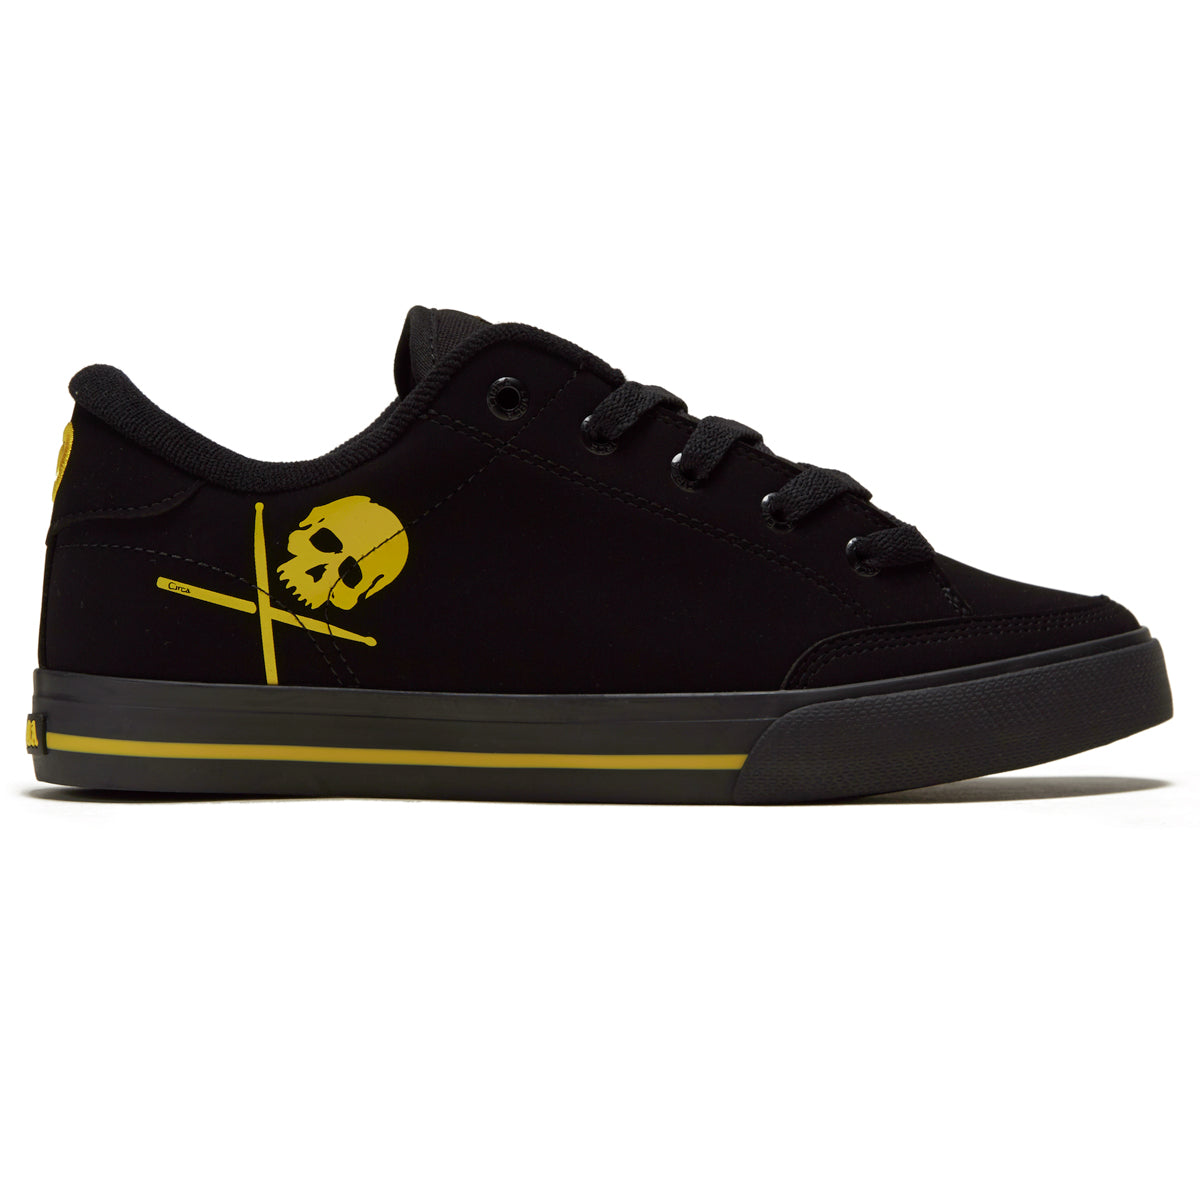 C1rca Buckler SK Shoes - Black/Spectra Yellow image 1